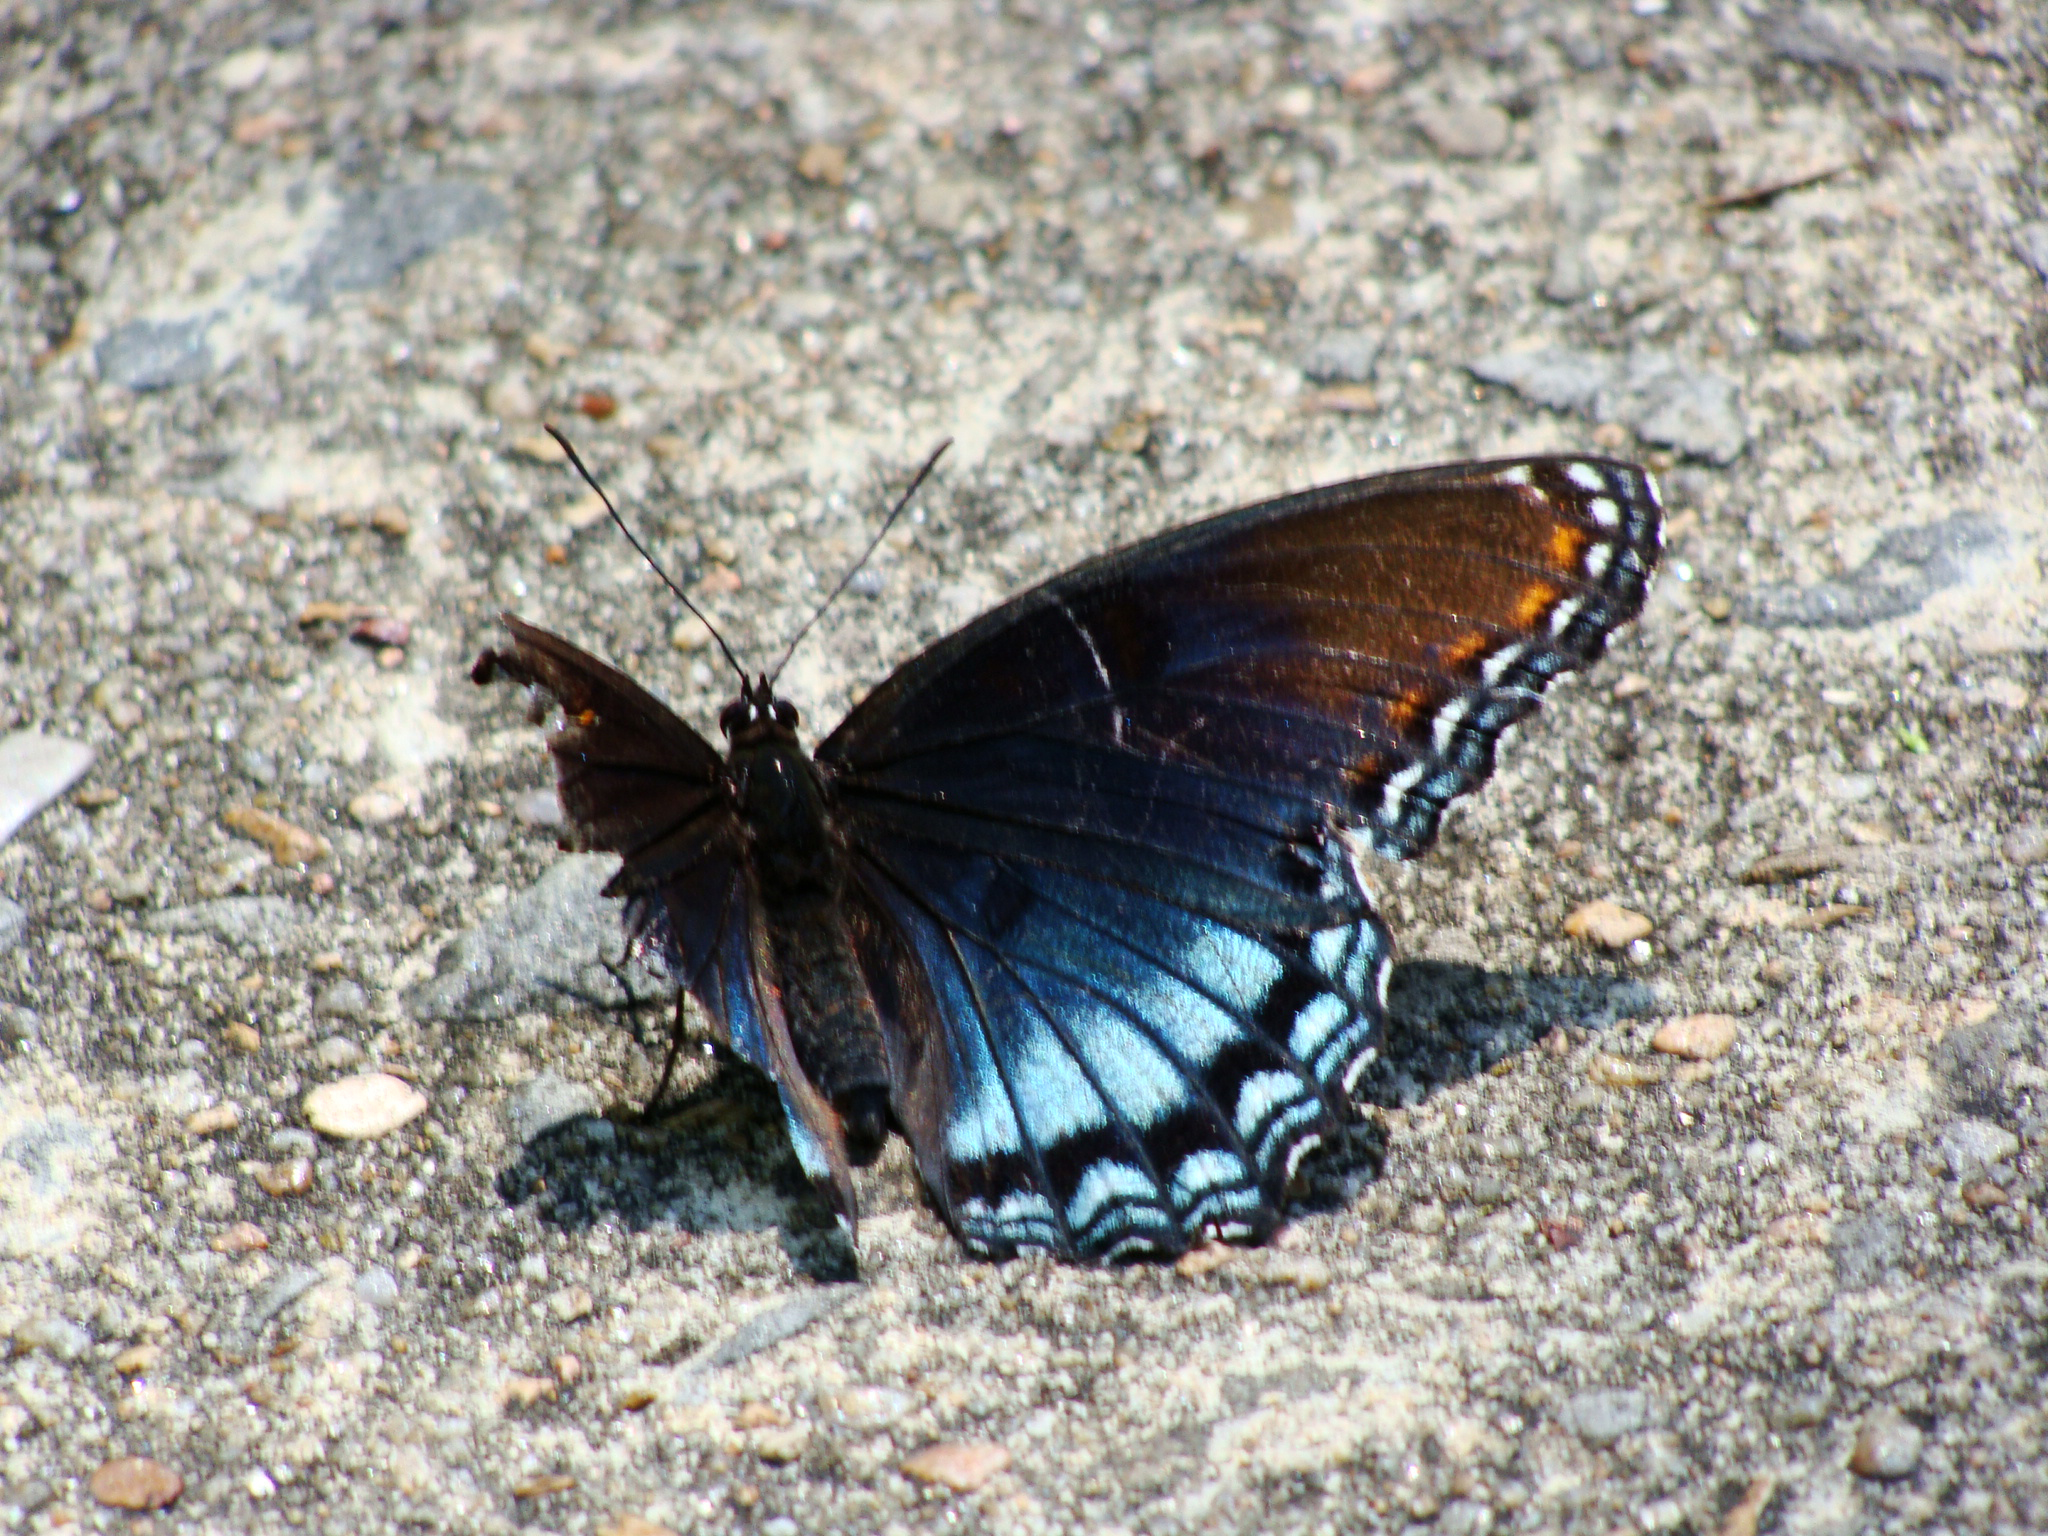 Red-spotted purple butterfly with one wing.